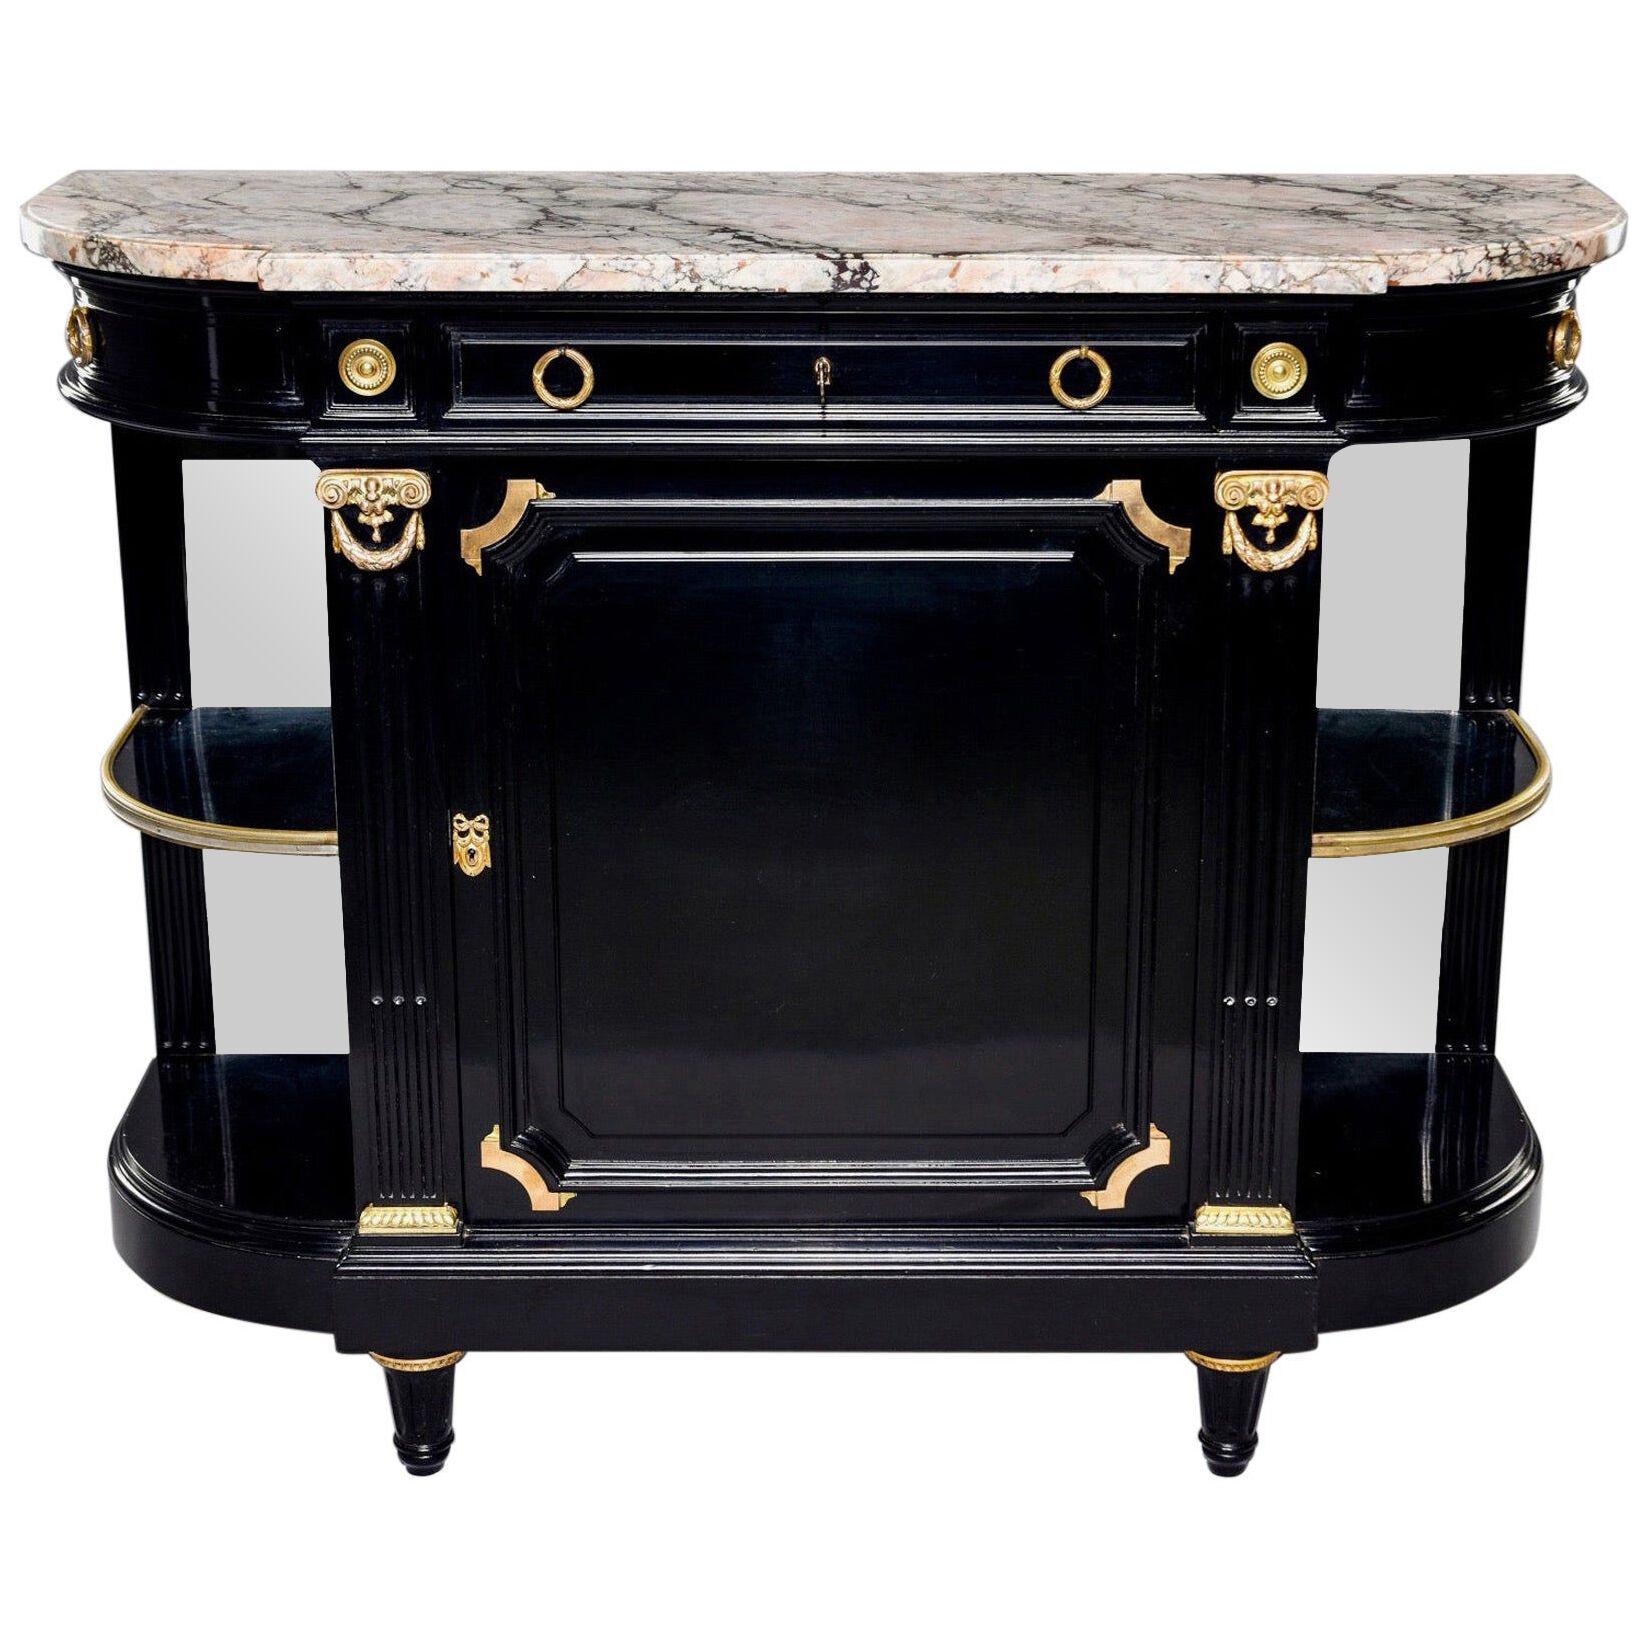 19th C French Empire Style Commode with Marble Top and Brass Fittings